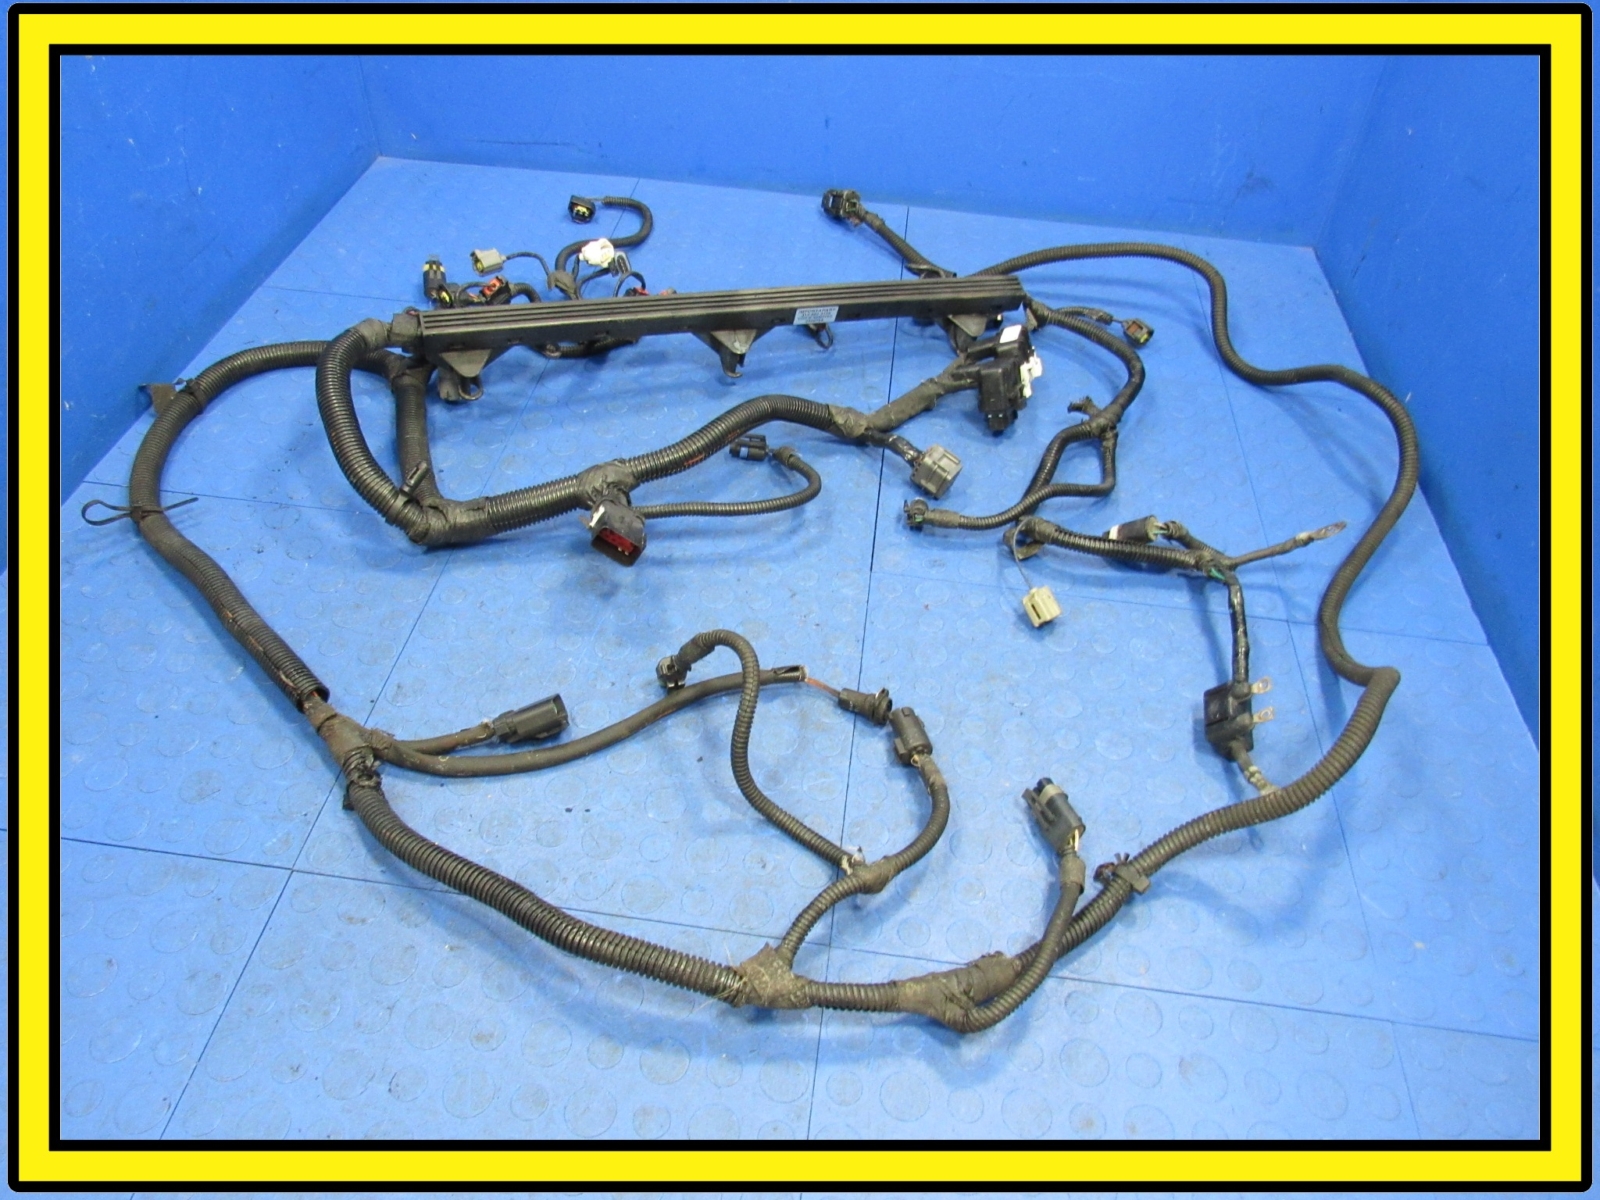 97-98 Jeep Wrangler  Automatic Engine Wiring Wire Harness Auto Trans  0795 – Importapart